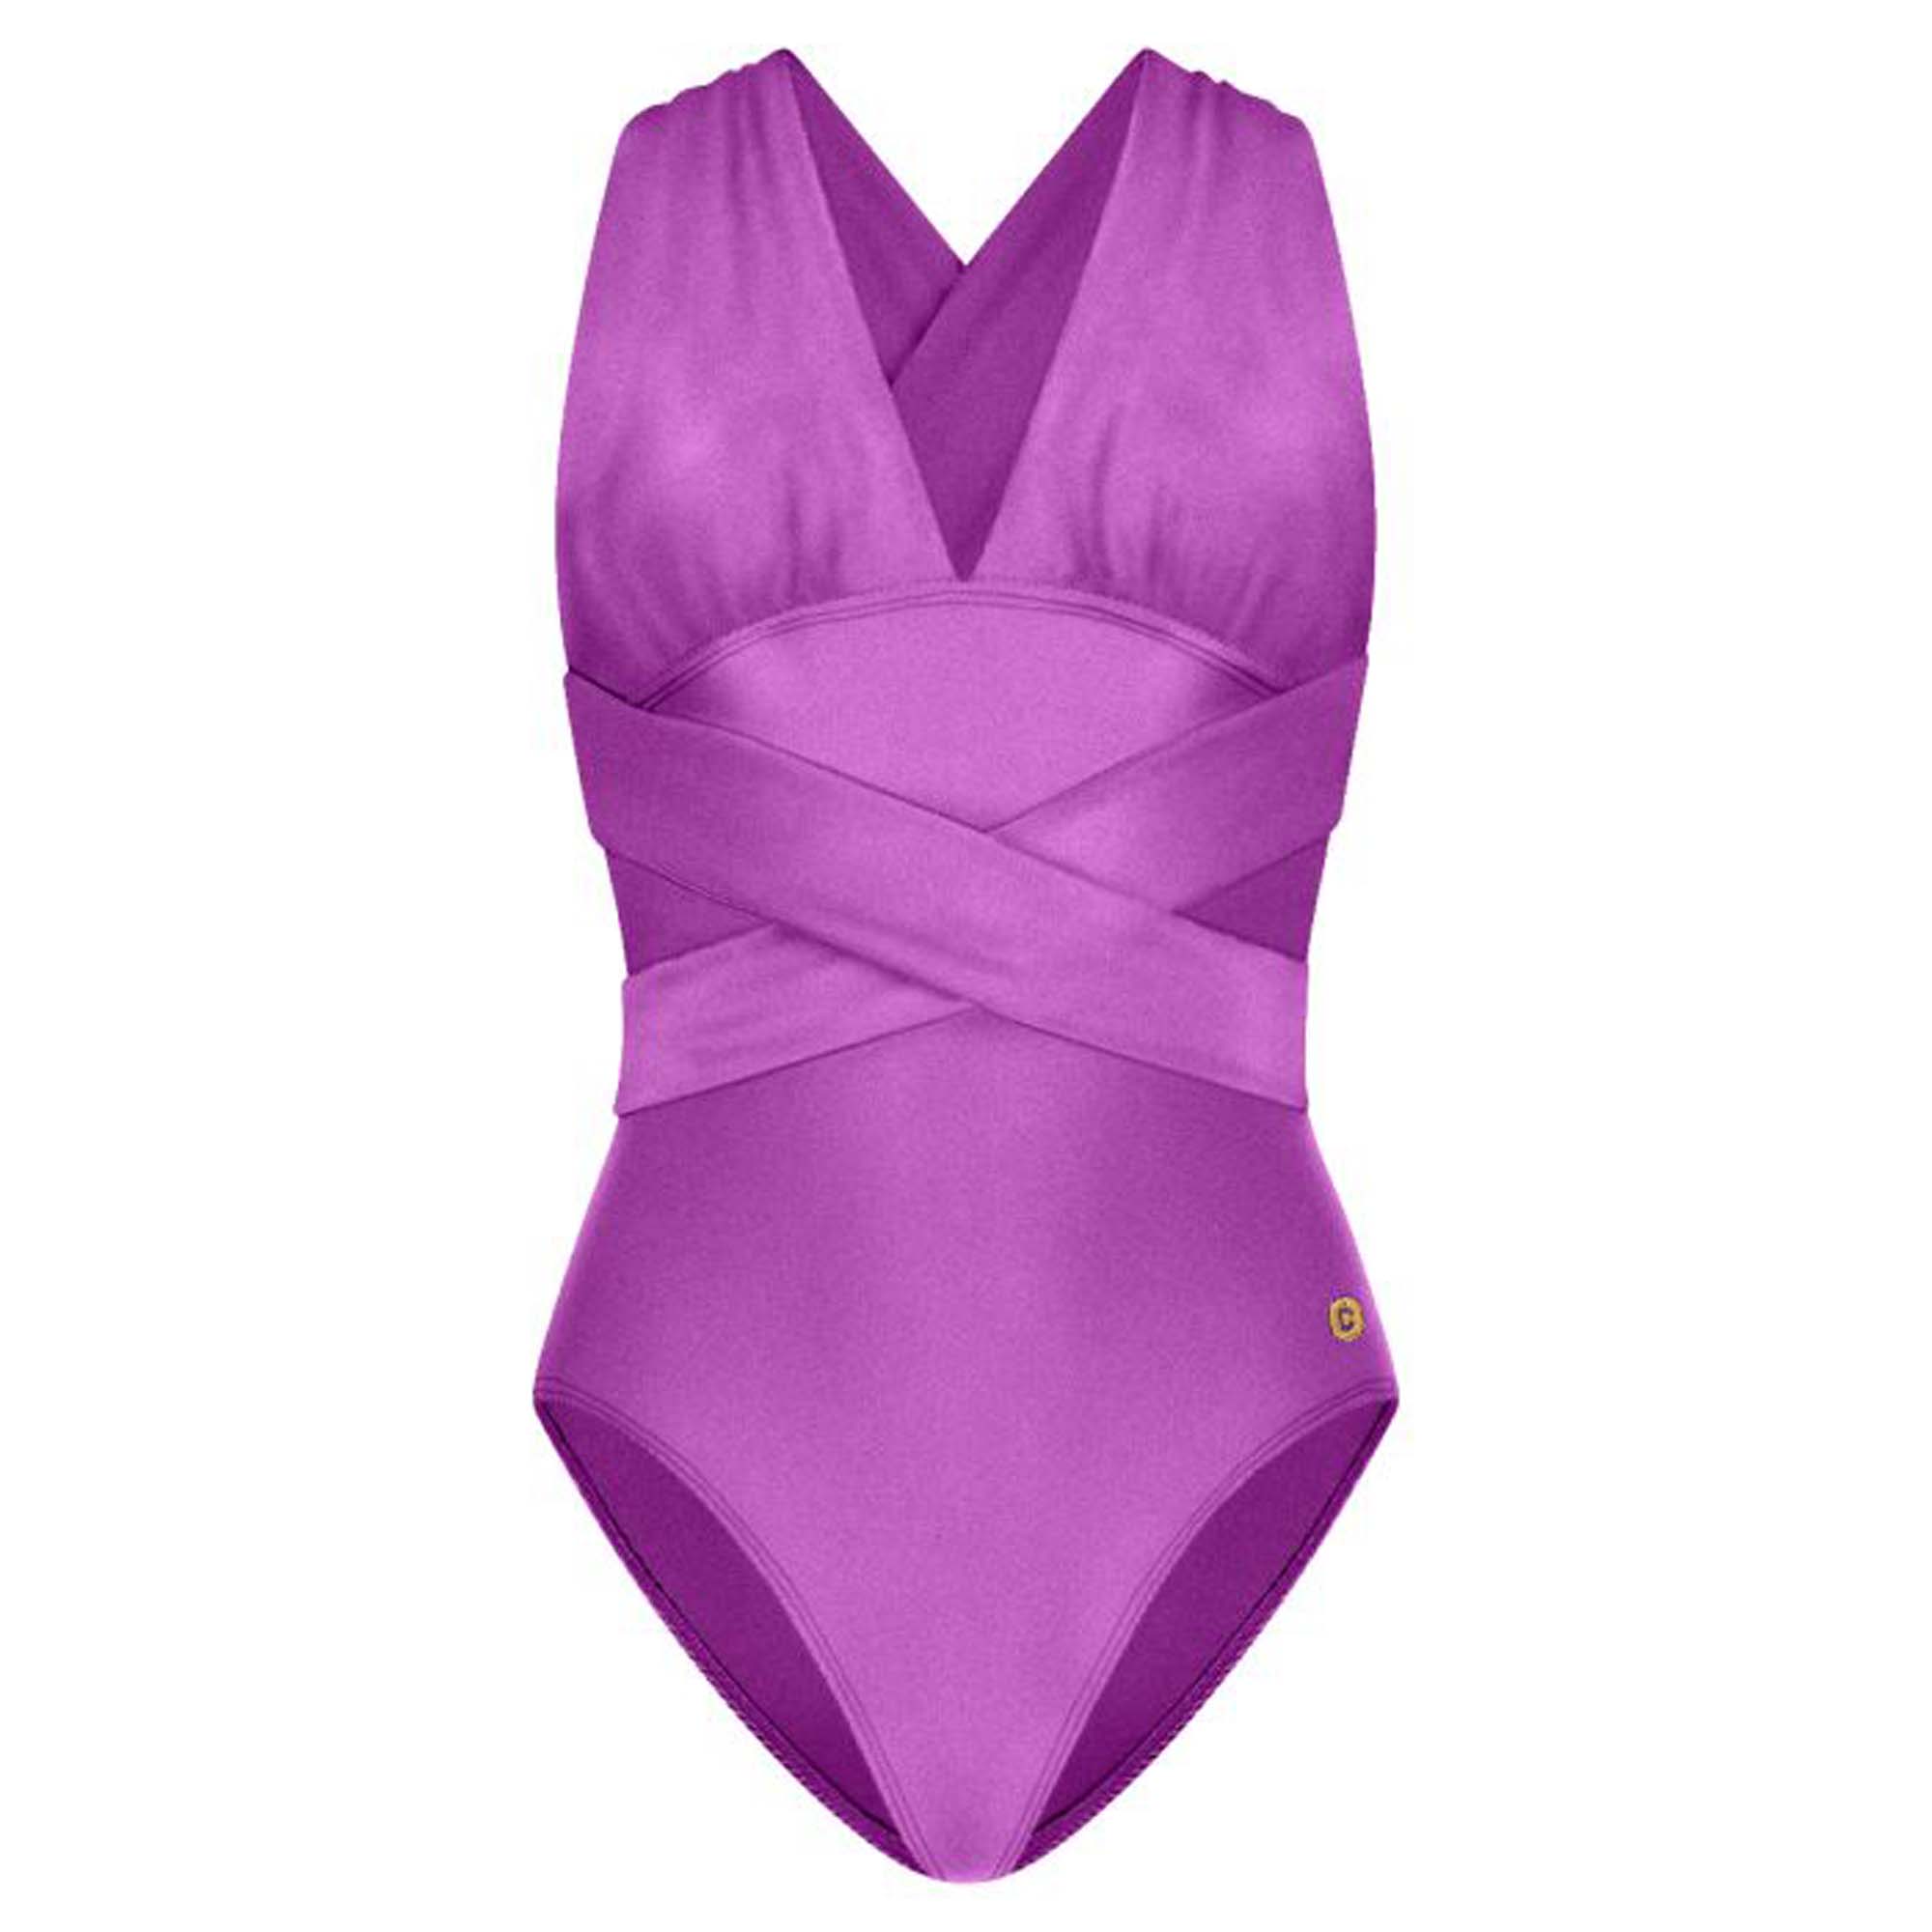 TEN CATE swimsuit multiway padded